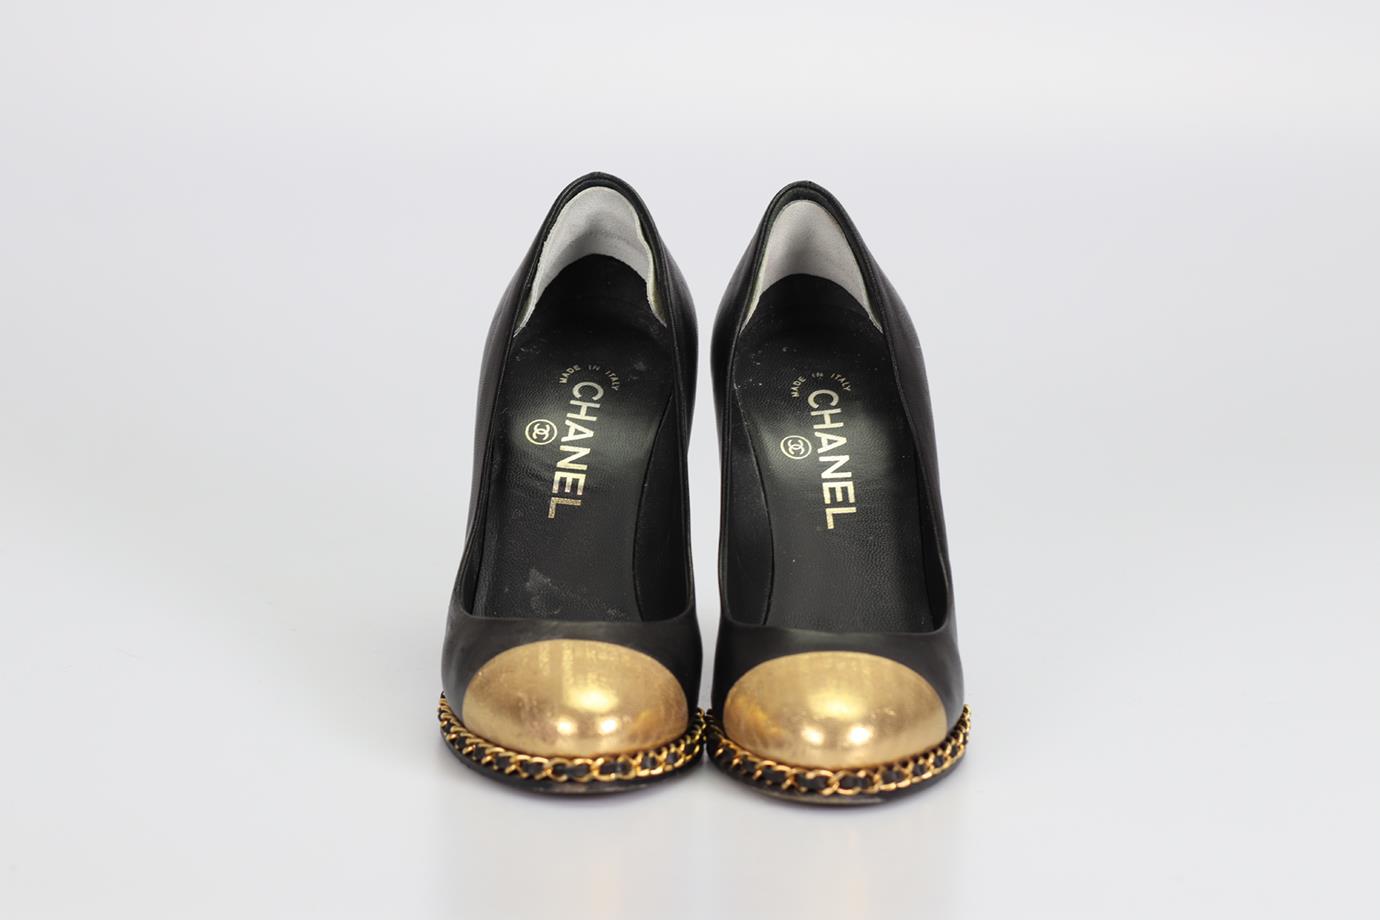 CHANEL 2013 CHAIN DETAILED LEATHER PUMPS EU 37 UK 4 US 7